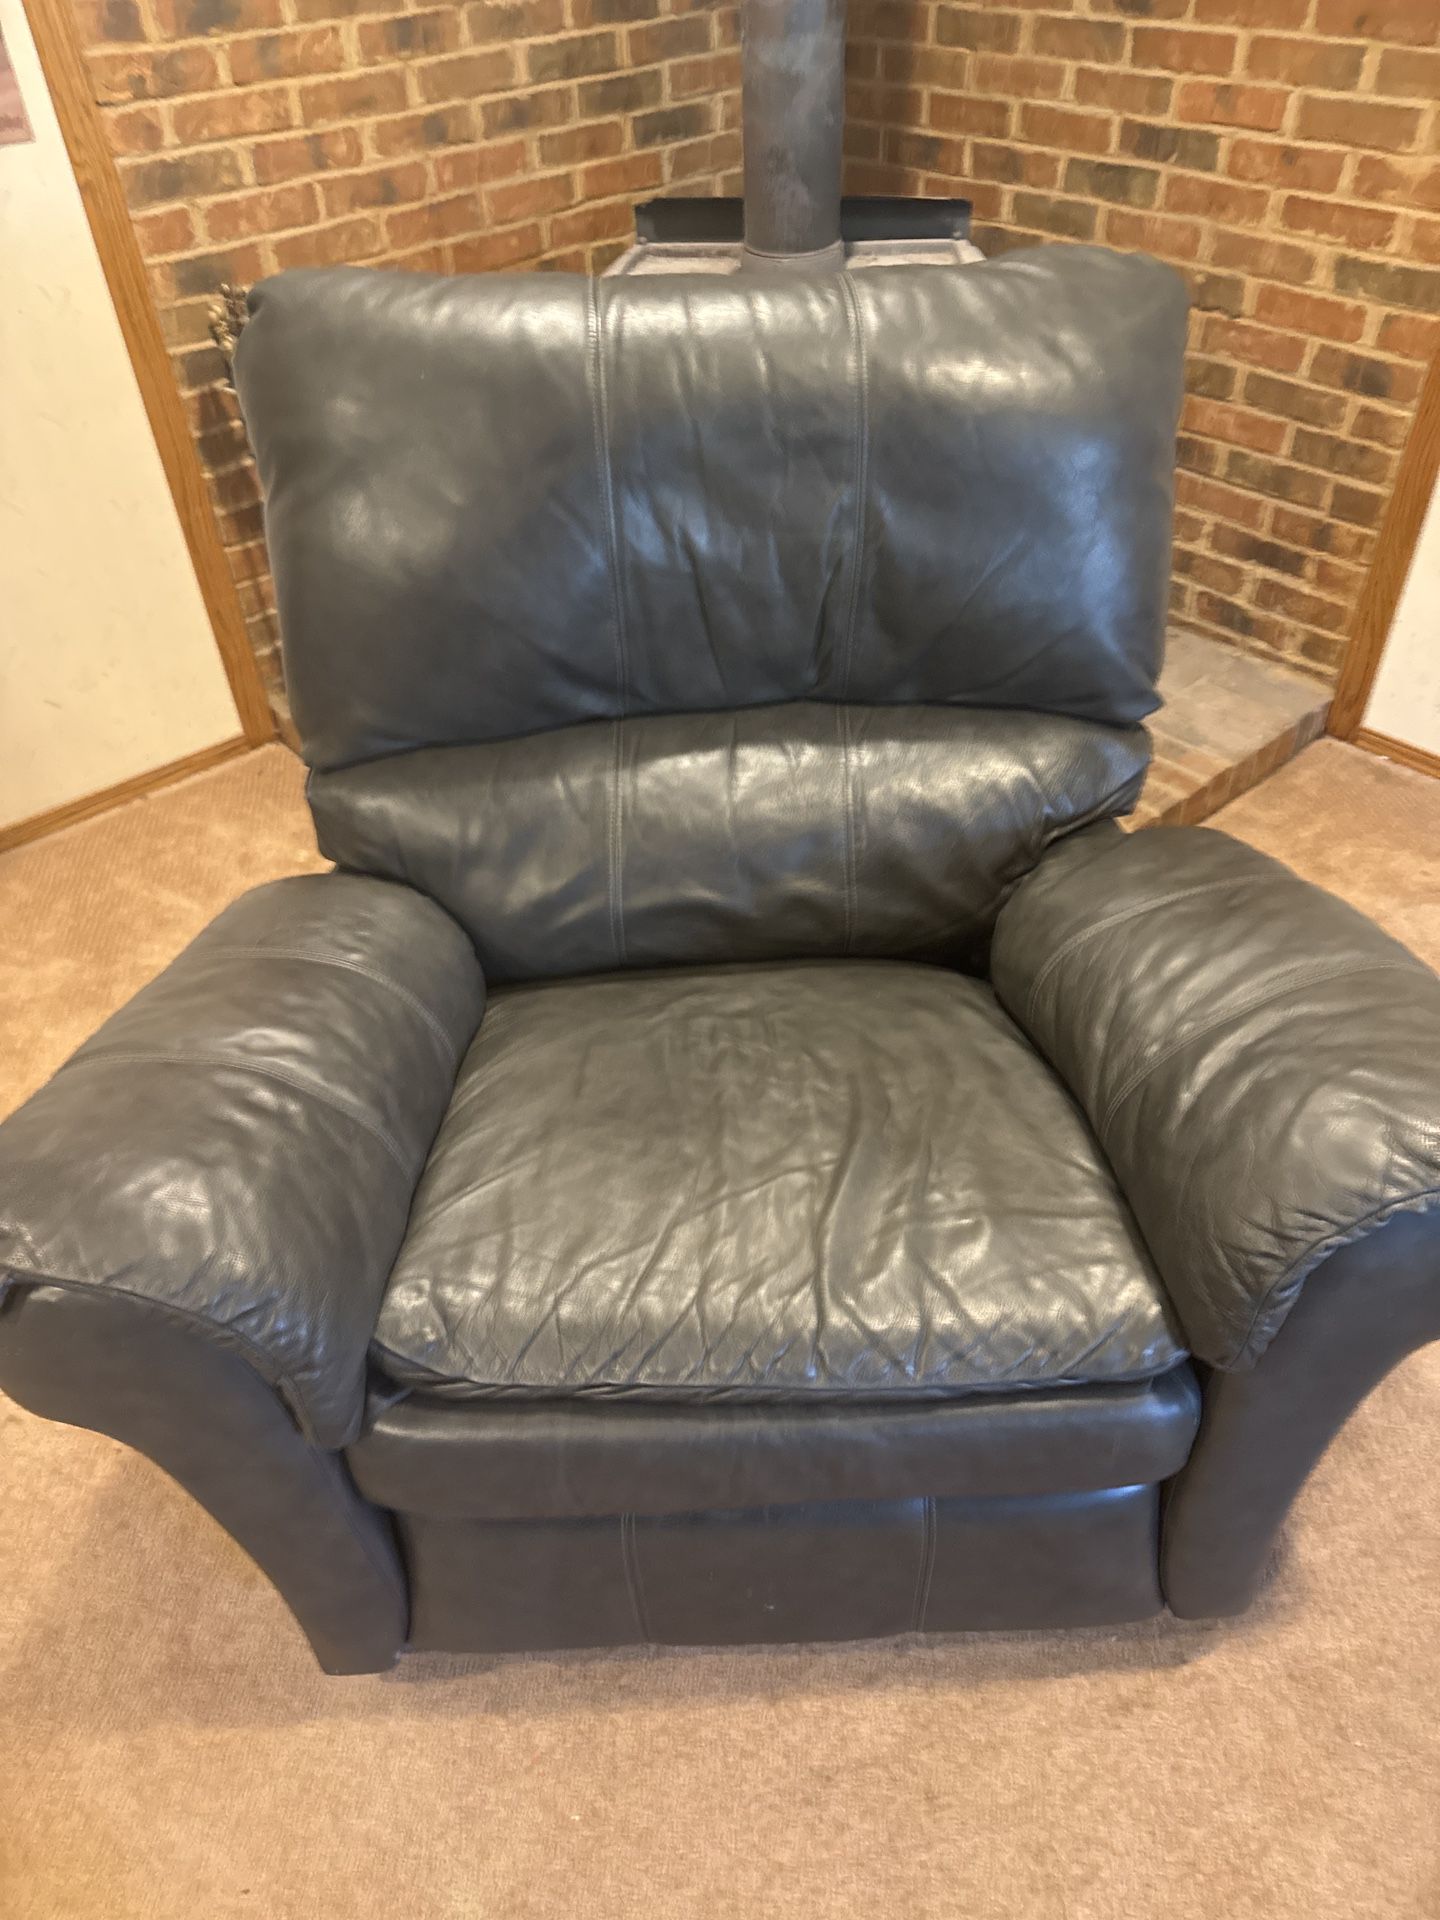 Classic Leather Armchair for Sale - $60